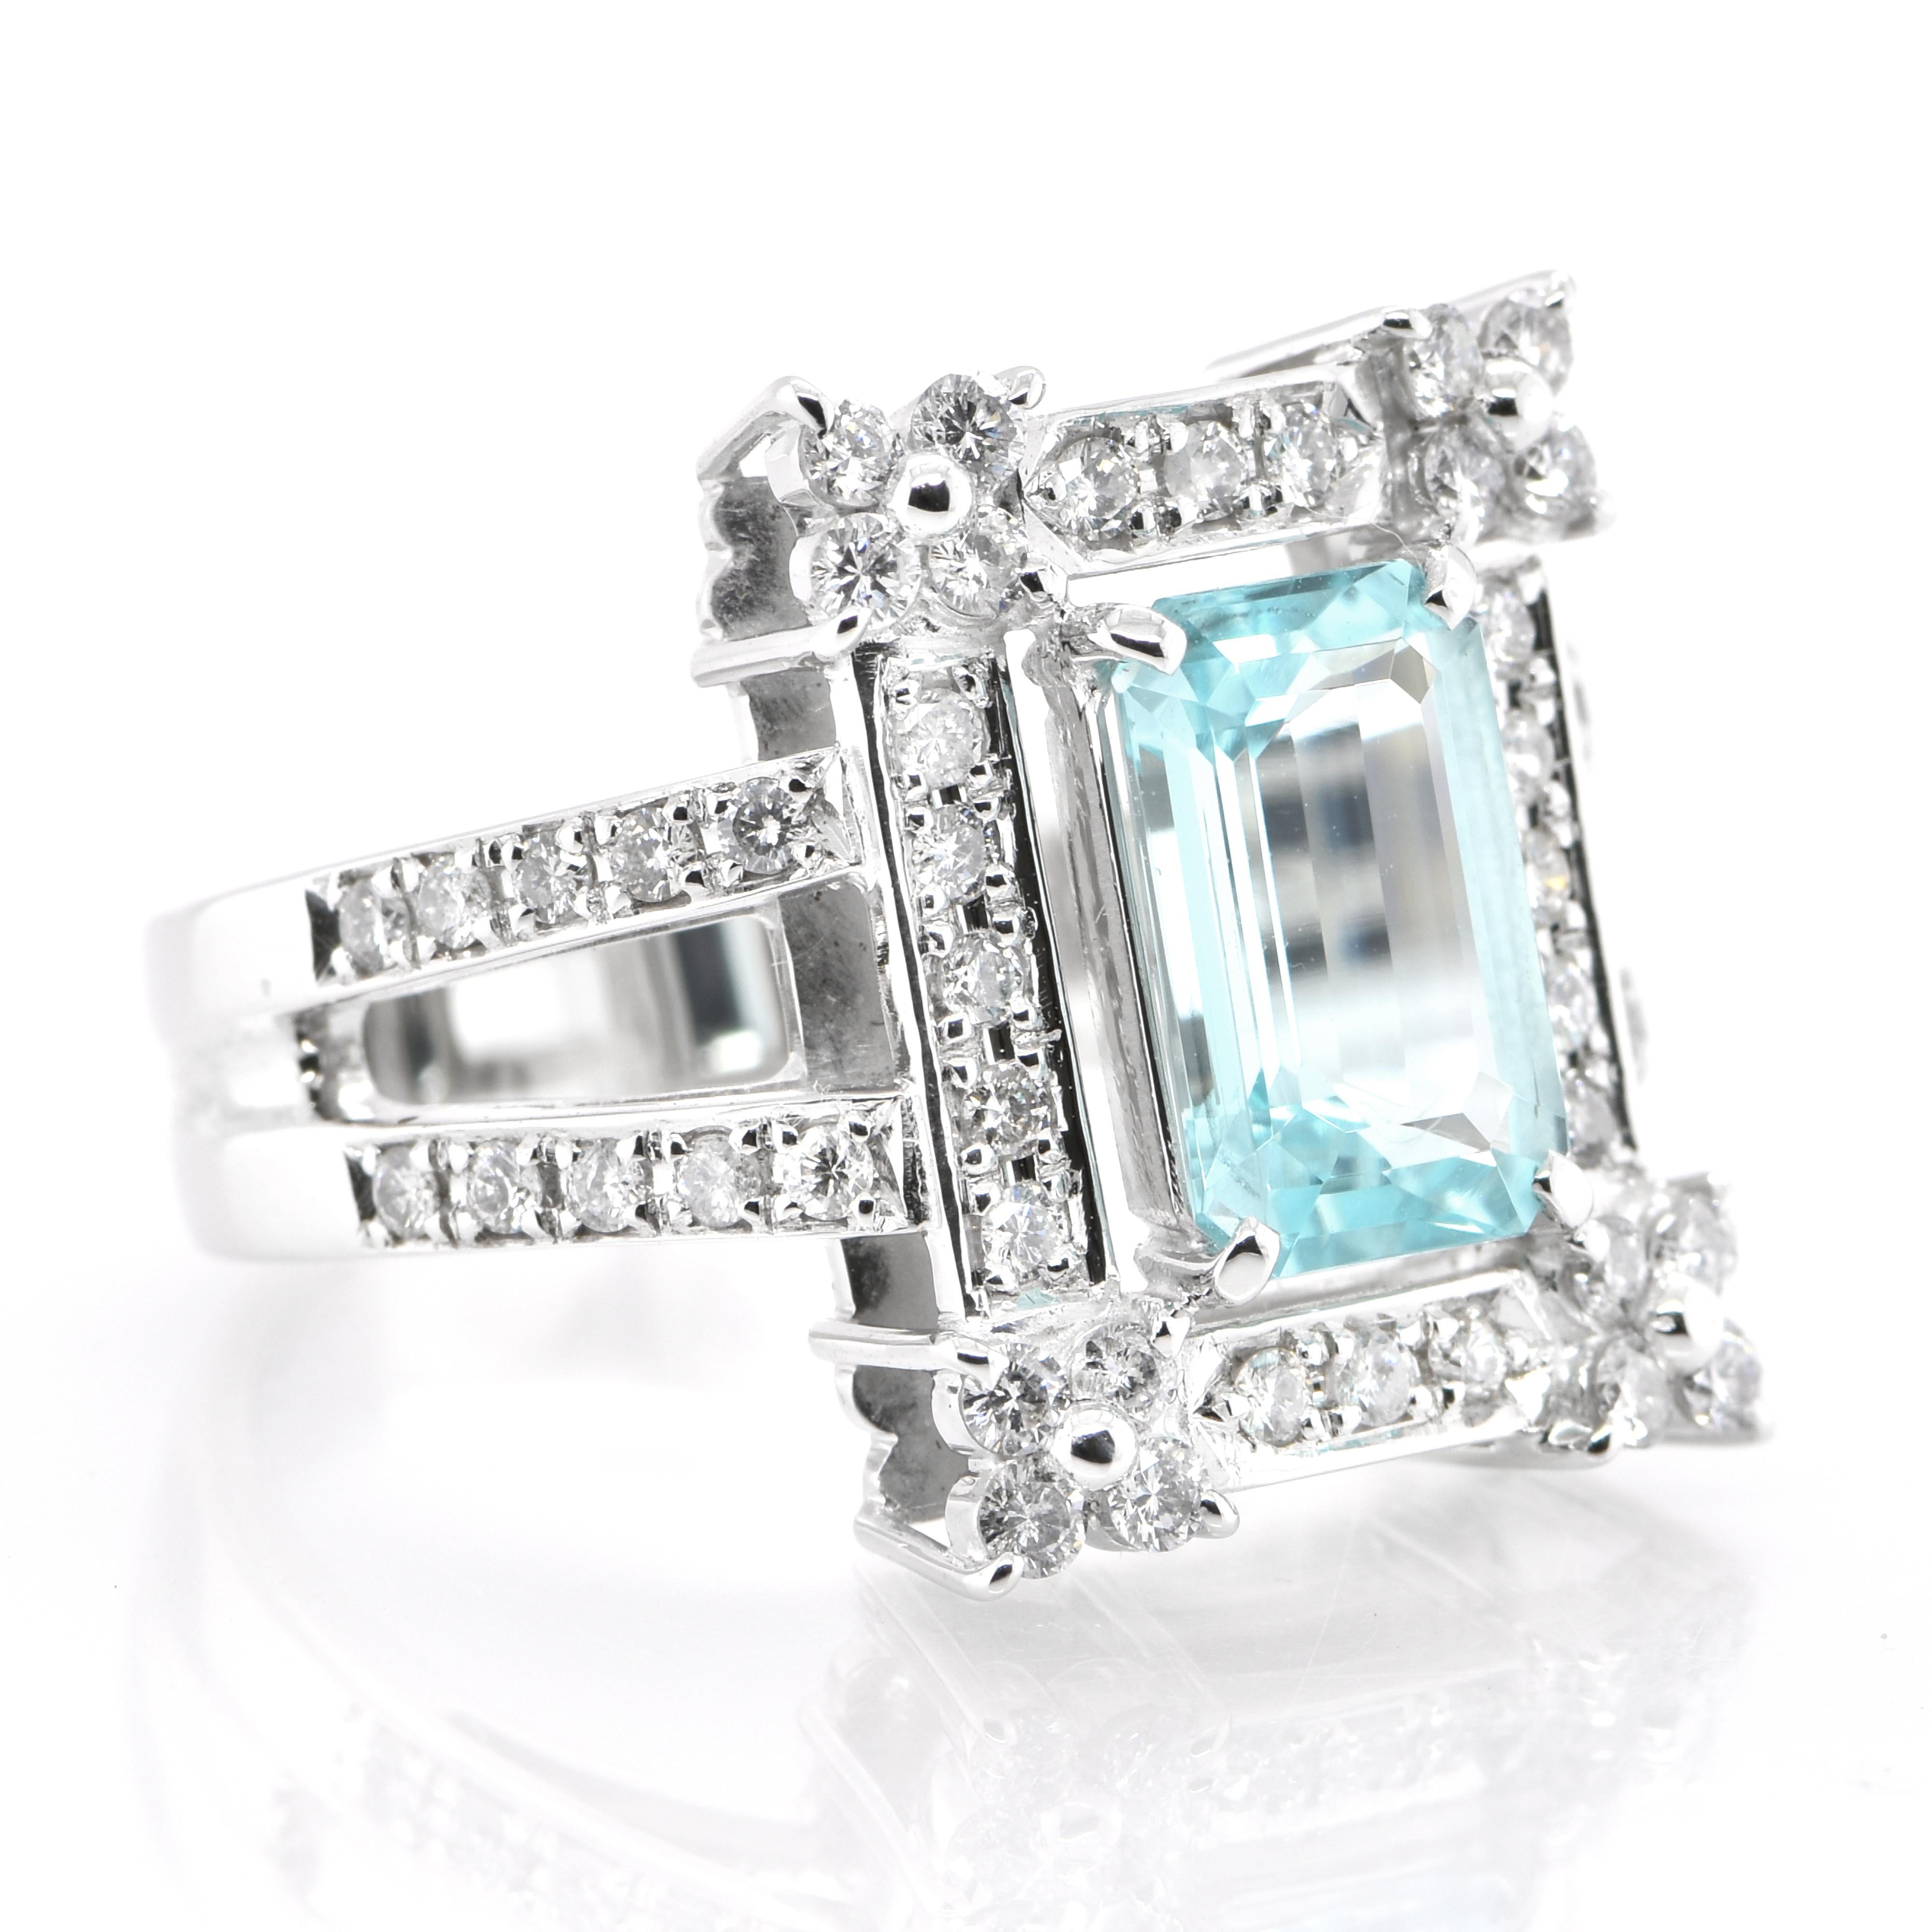 Art Deco 2.38 Carat Natural Paraiba Tourmaline and Diamond Ring Set in 18K White Gold For Sale